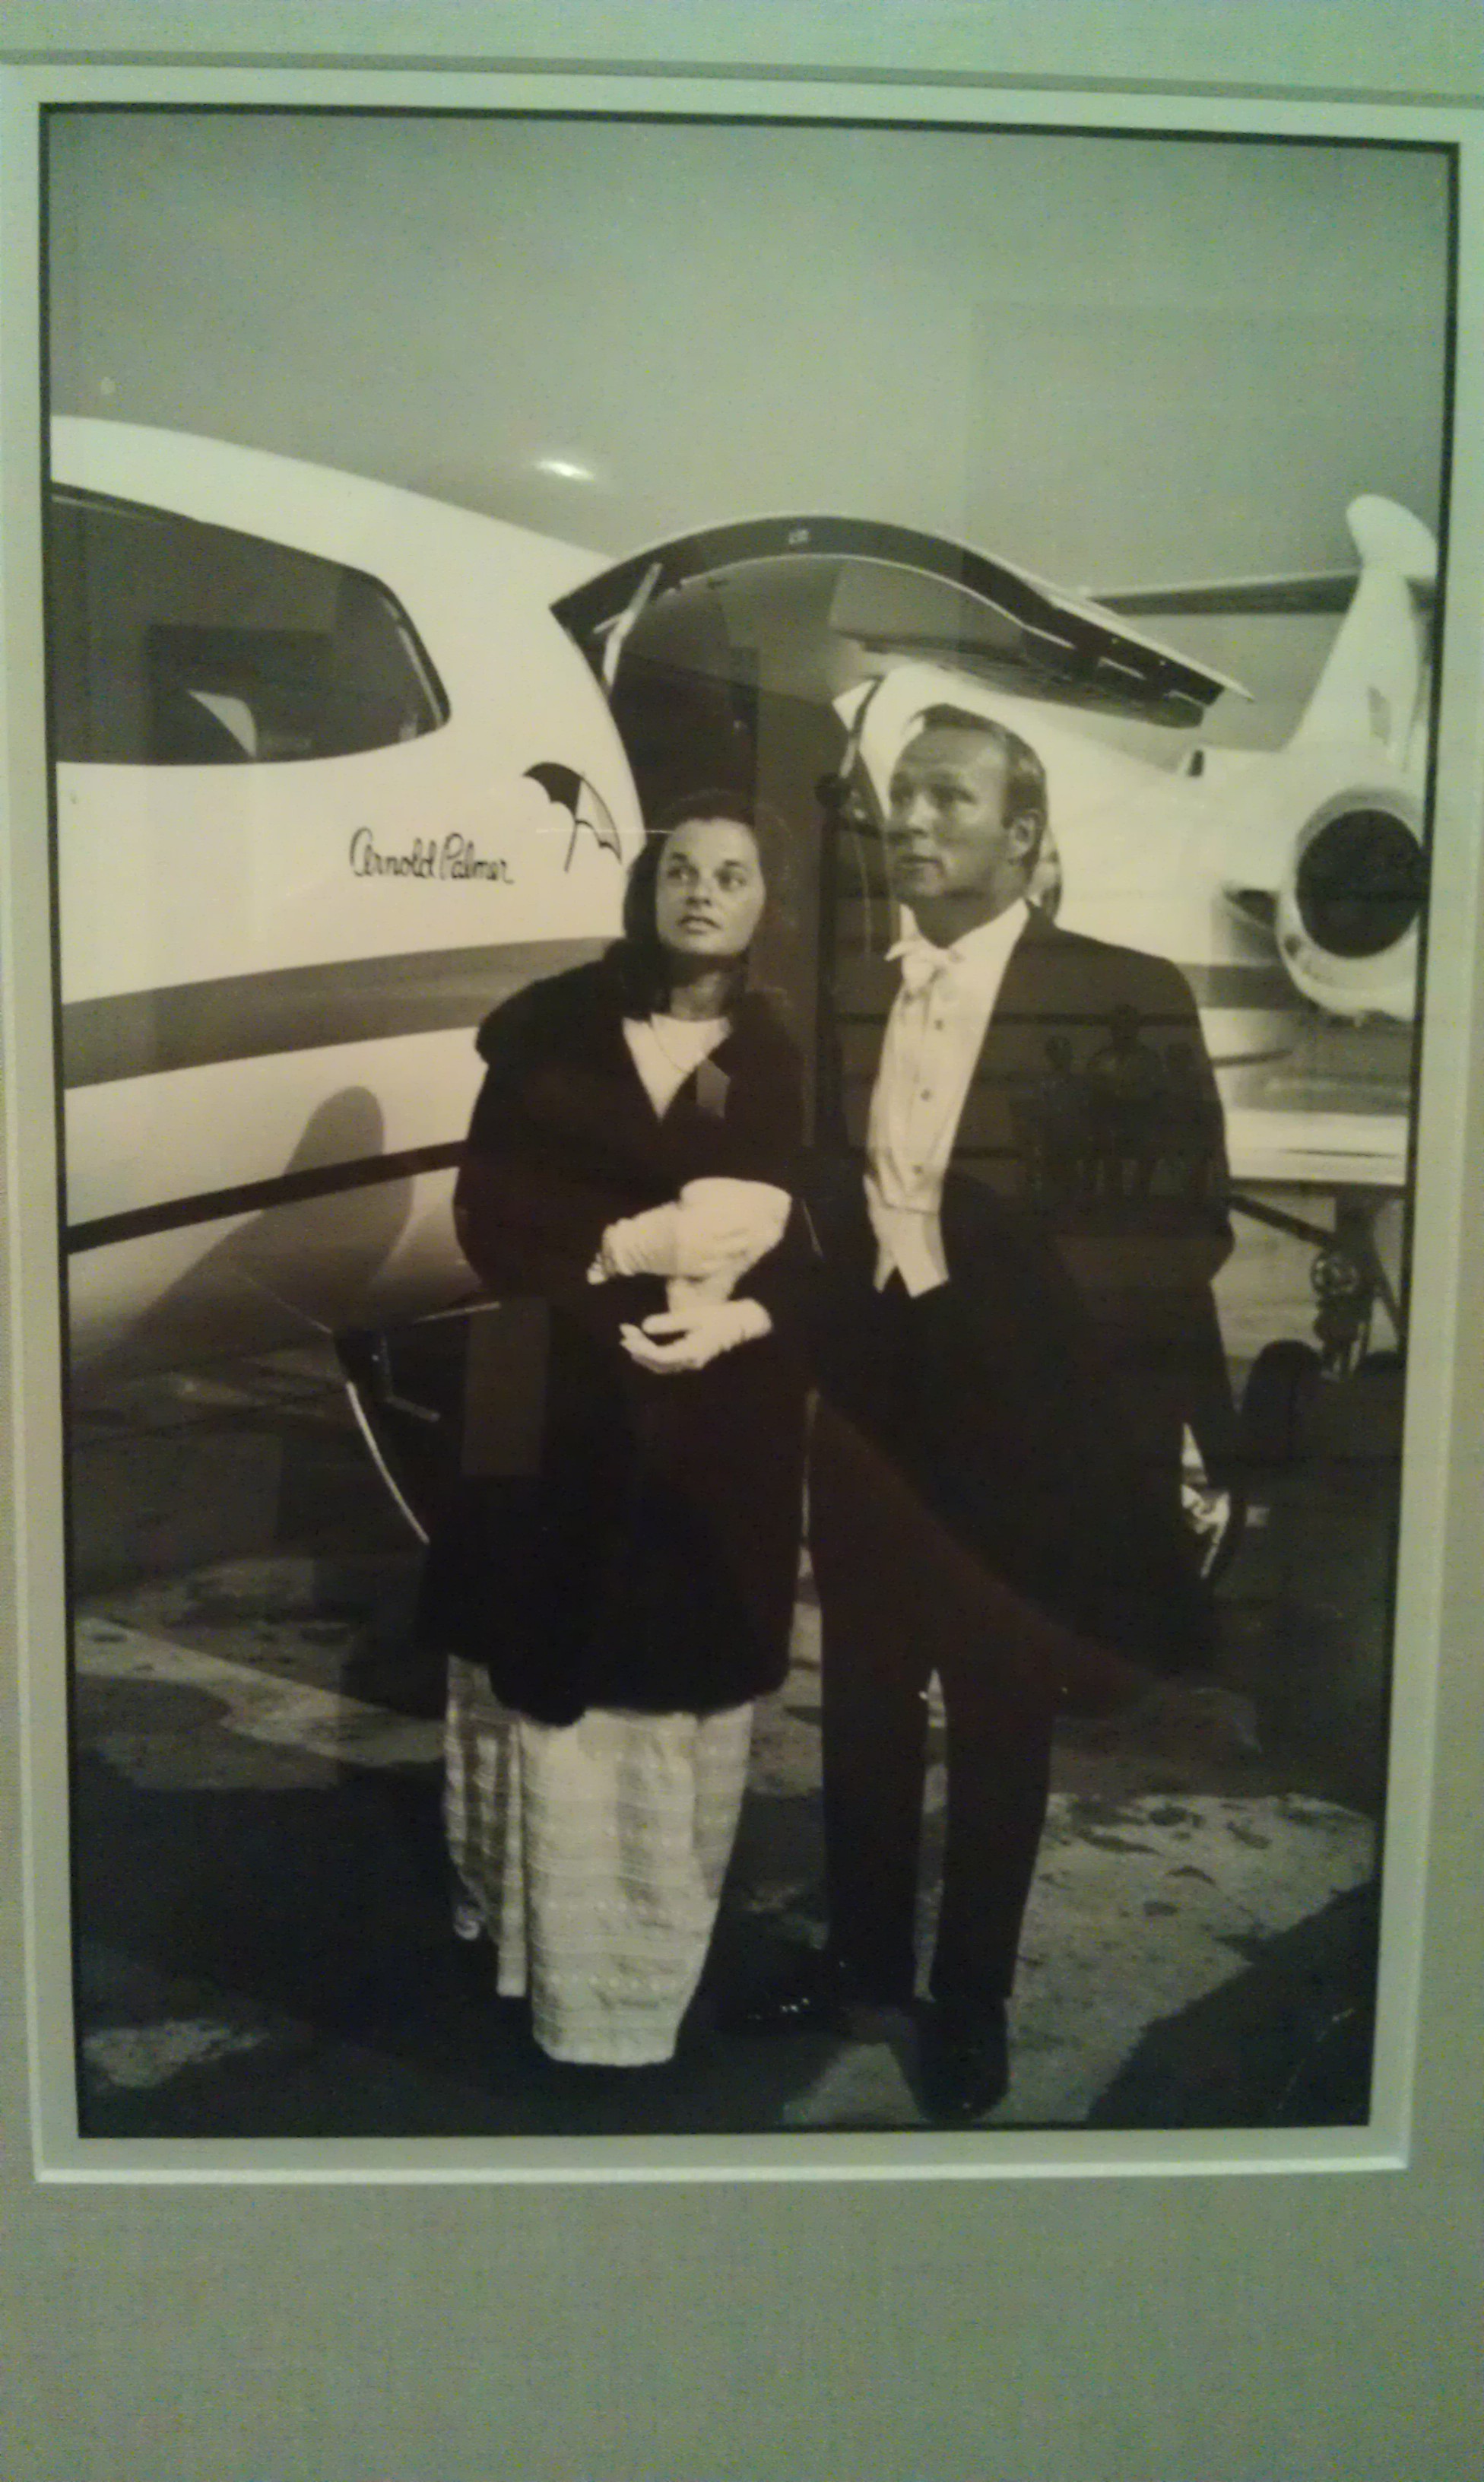 Latrobe Country Club: Arnold and Winnie Palmer in front of private jet